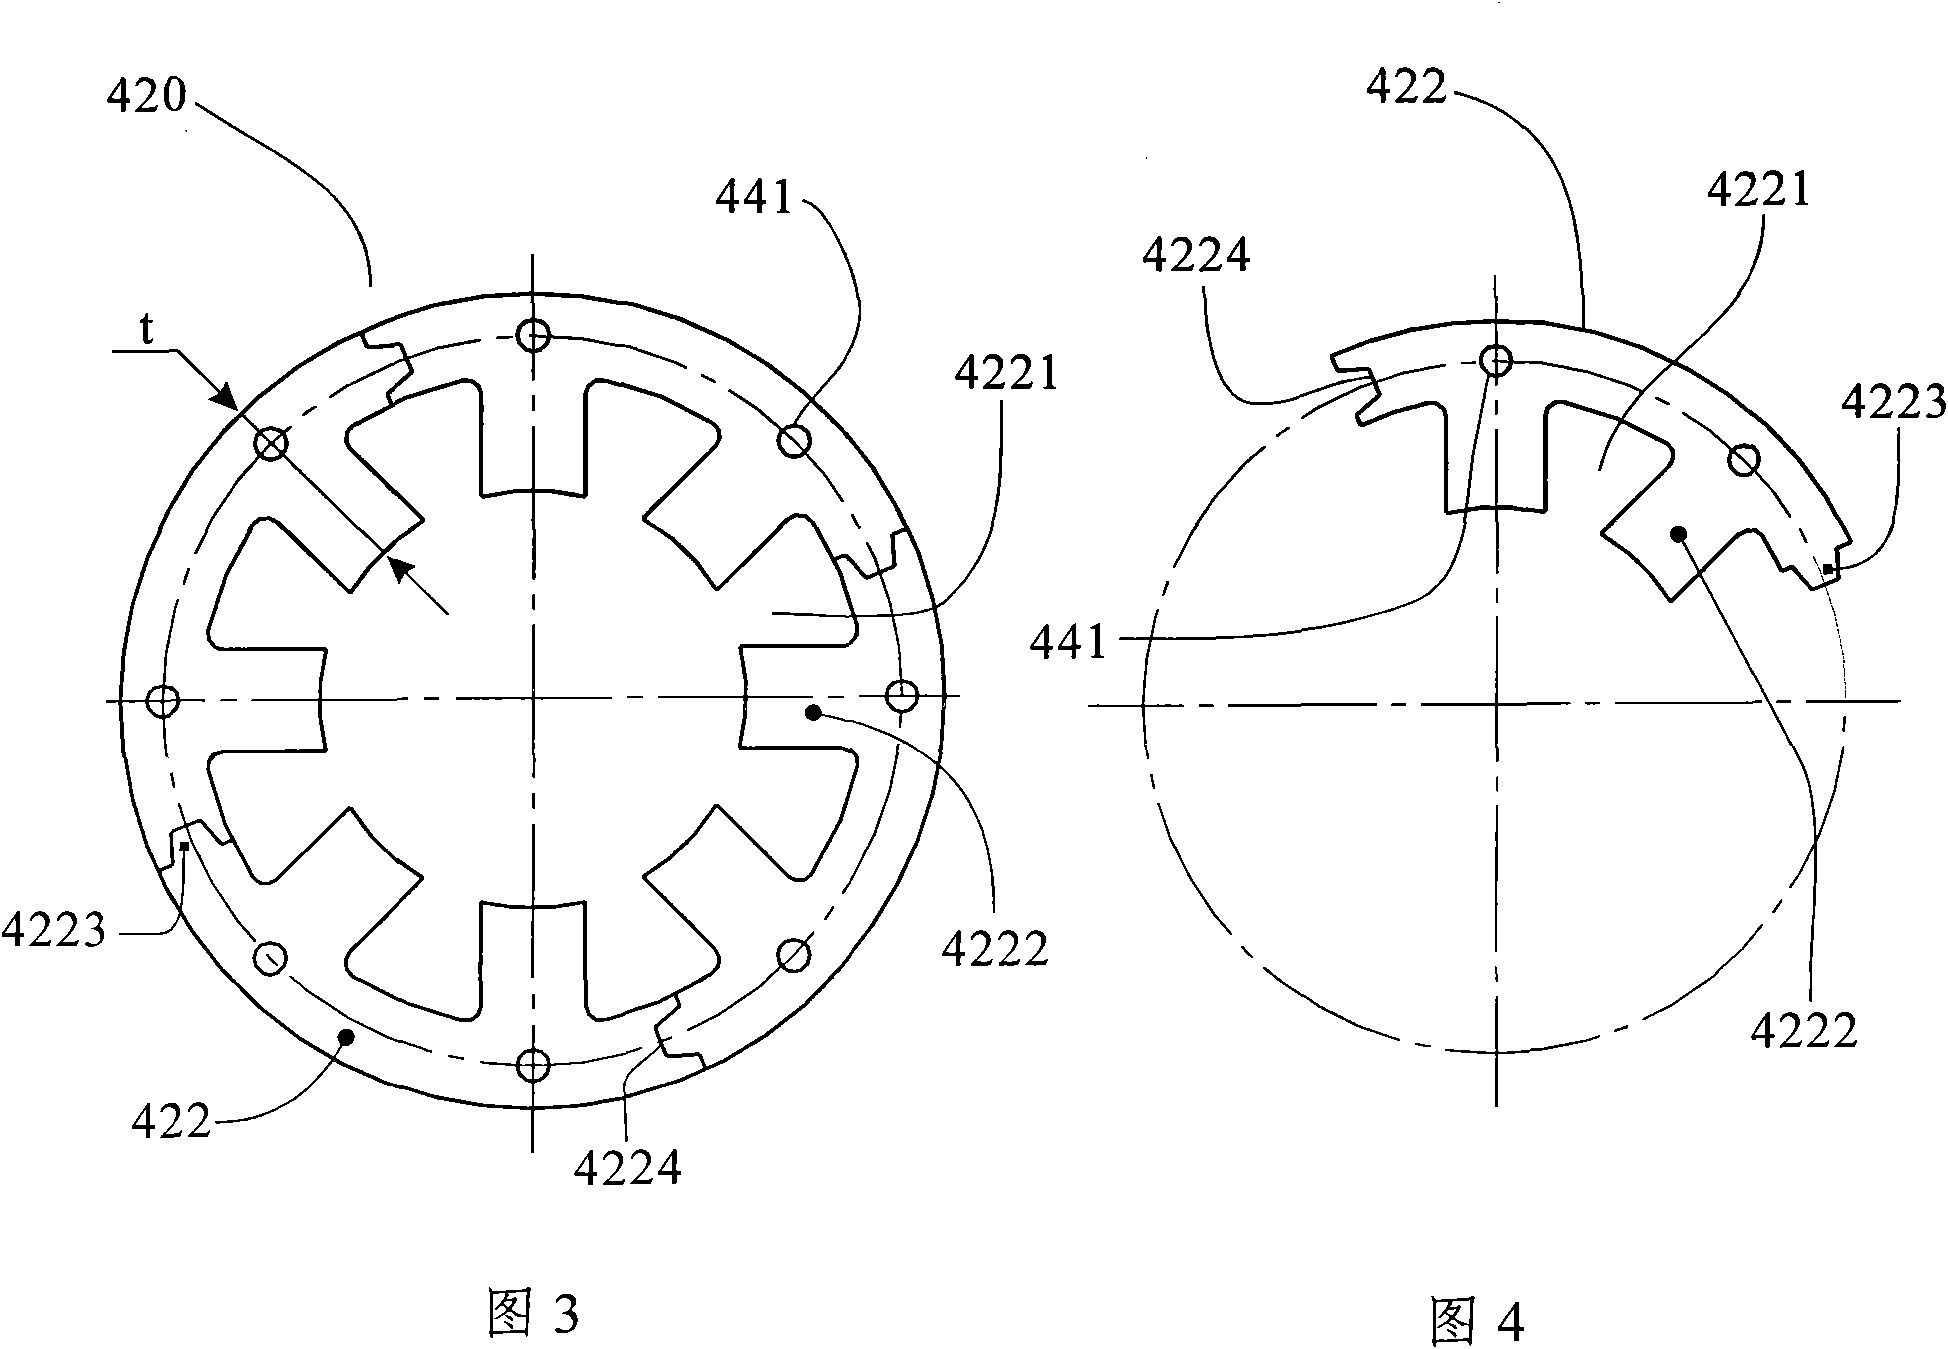 Switched reluctance motor for constructing magnetic circuit based on modularizing way